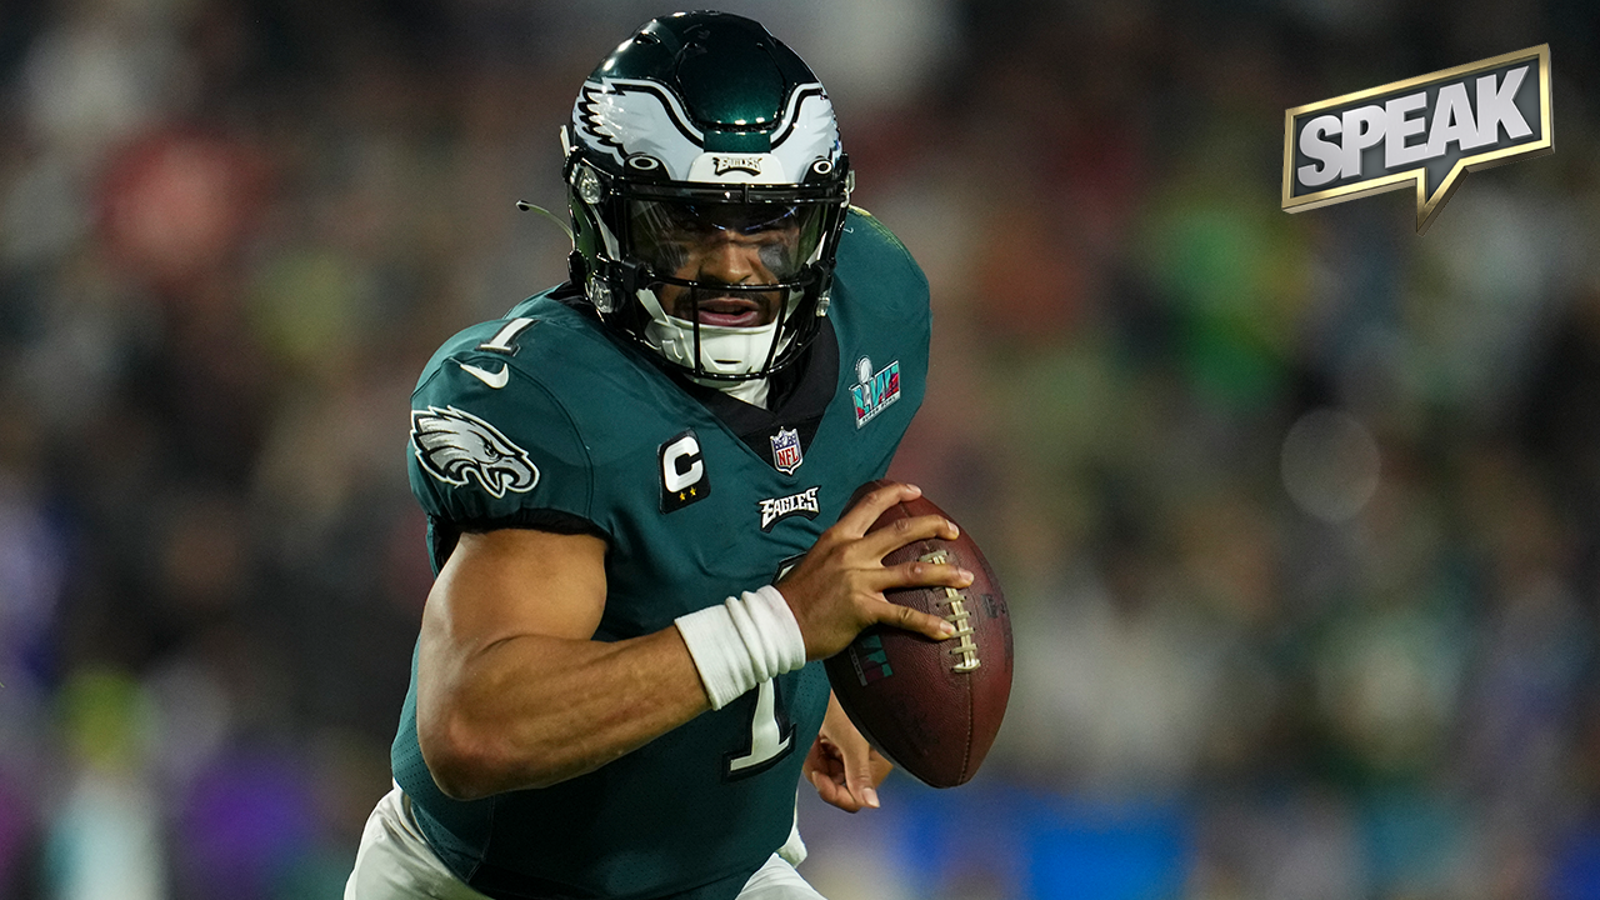 Is a Hurts extension smart for Eagles right now?